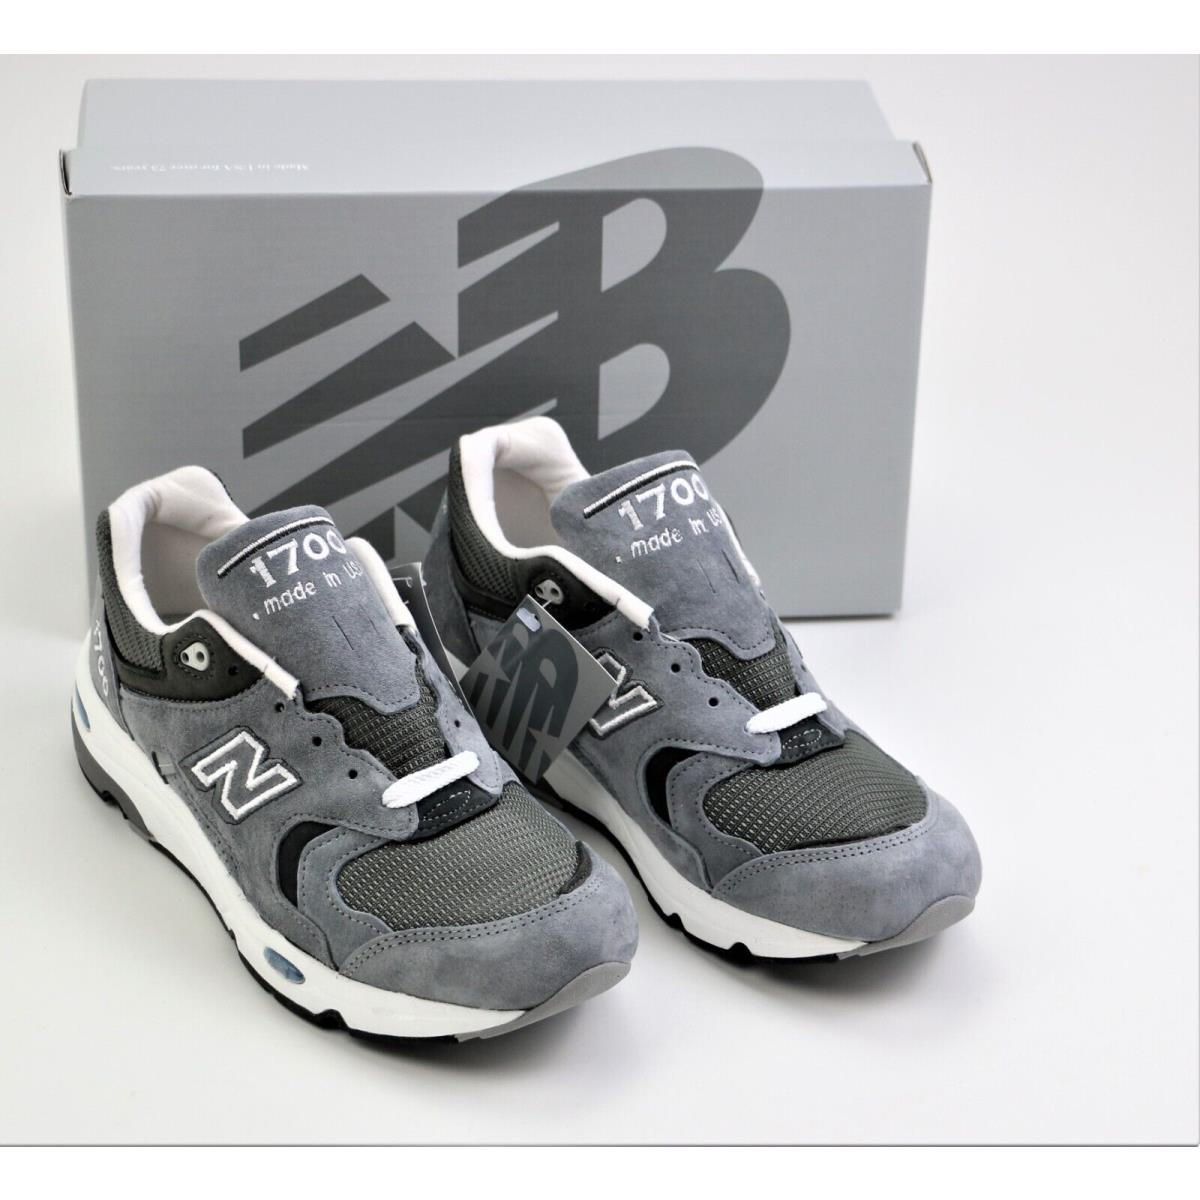 New Balance 1700 Shoes Dark Grey M1700GJ Men`s Size 8 Made in Usa